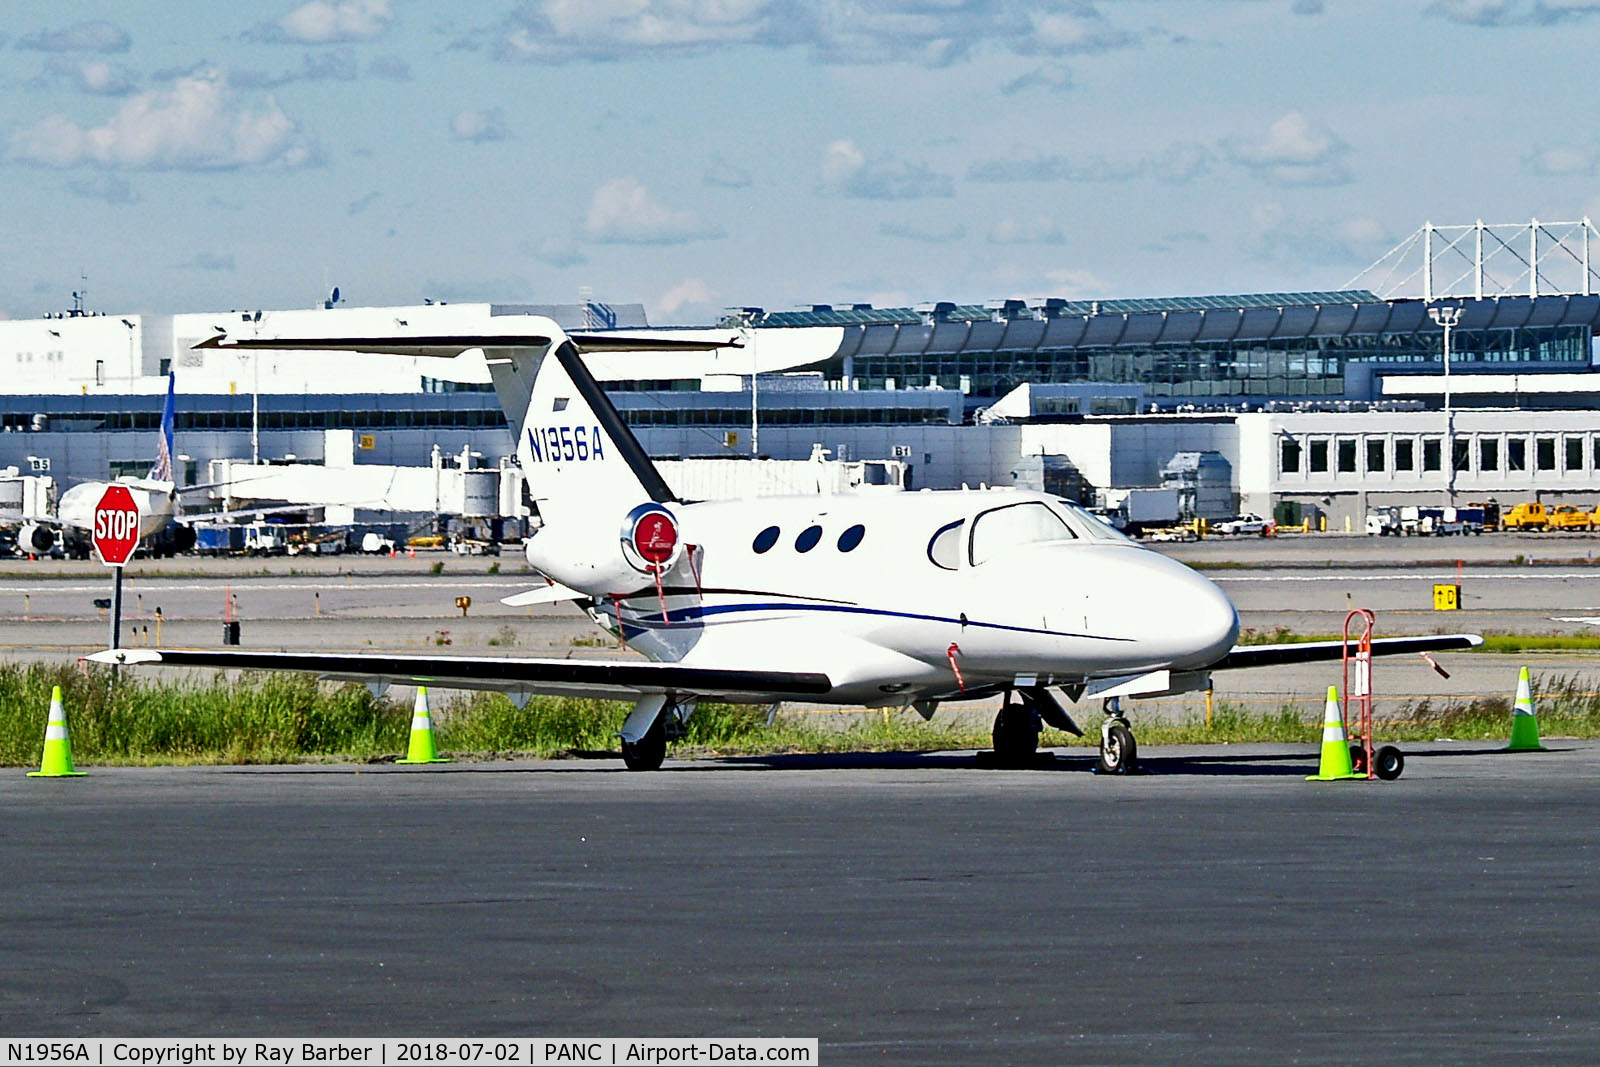 N1956A, Cessna 510 Citation Mustang C/N 510-0305, N1956A   Cessna Citation Mustang [510-0305] Ted Stevens Anchorage Int~N 02/07/2018